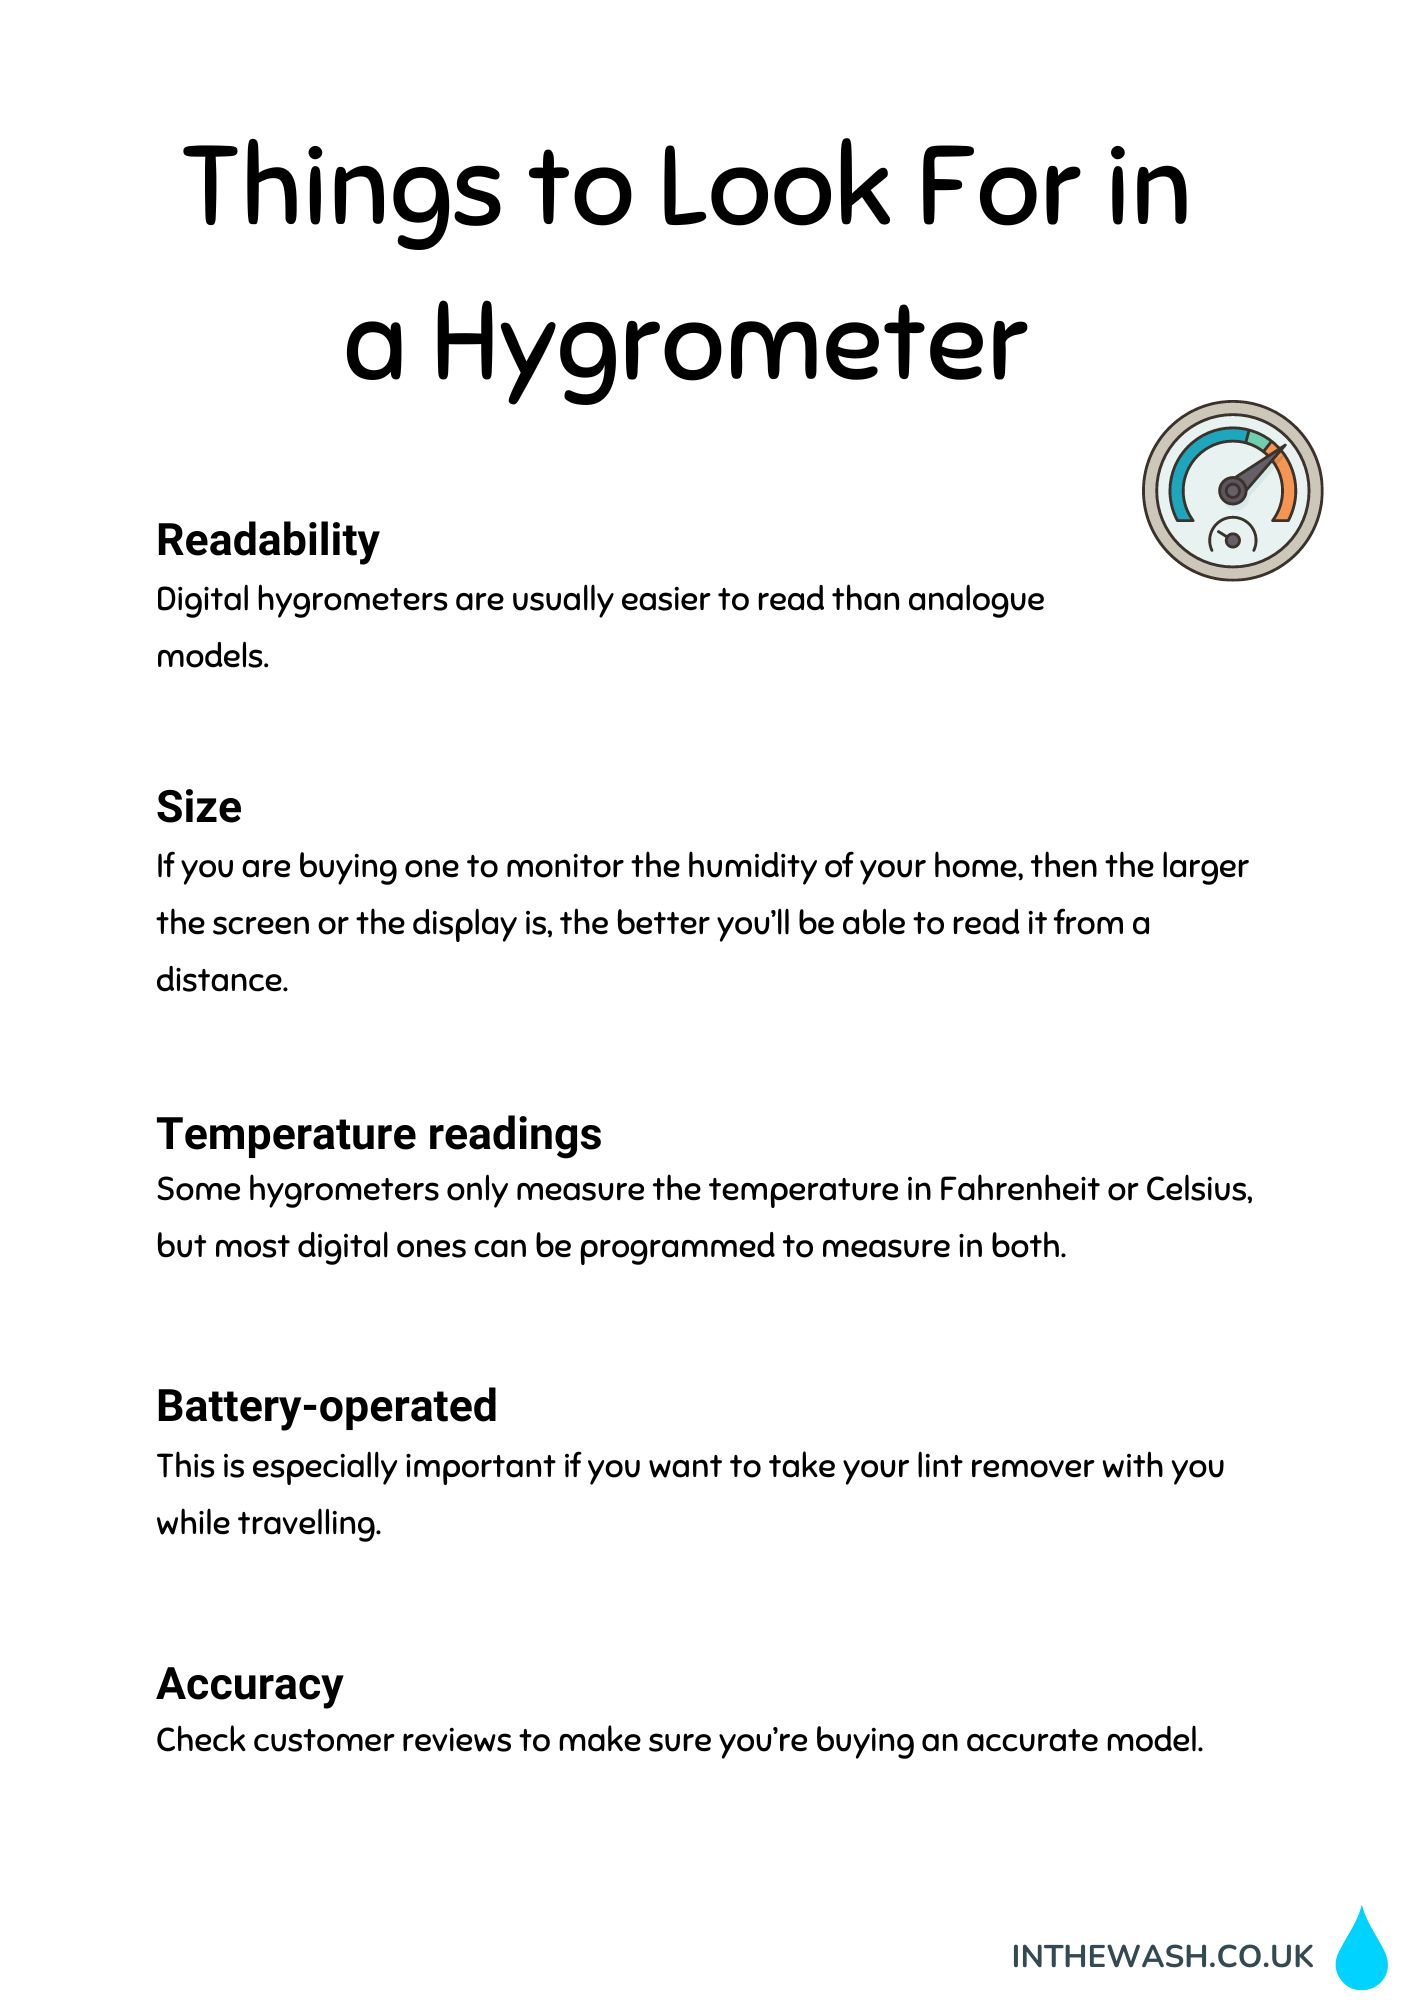 Things to look for in a hygrometer